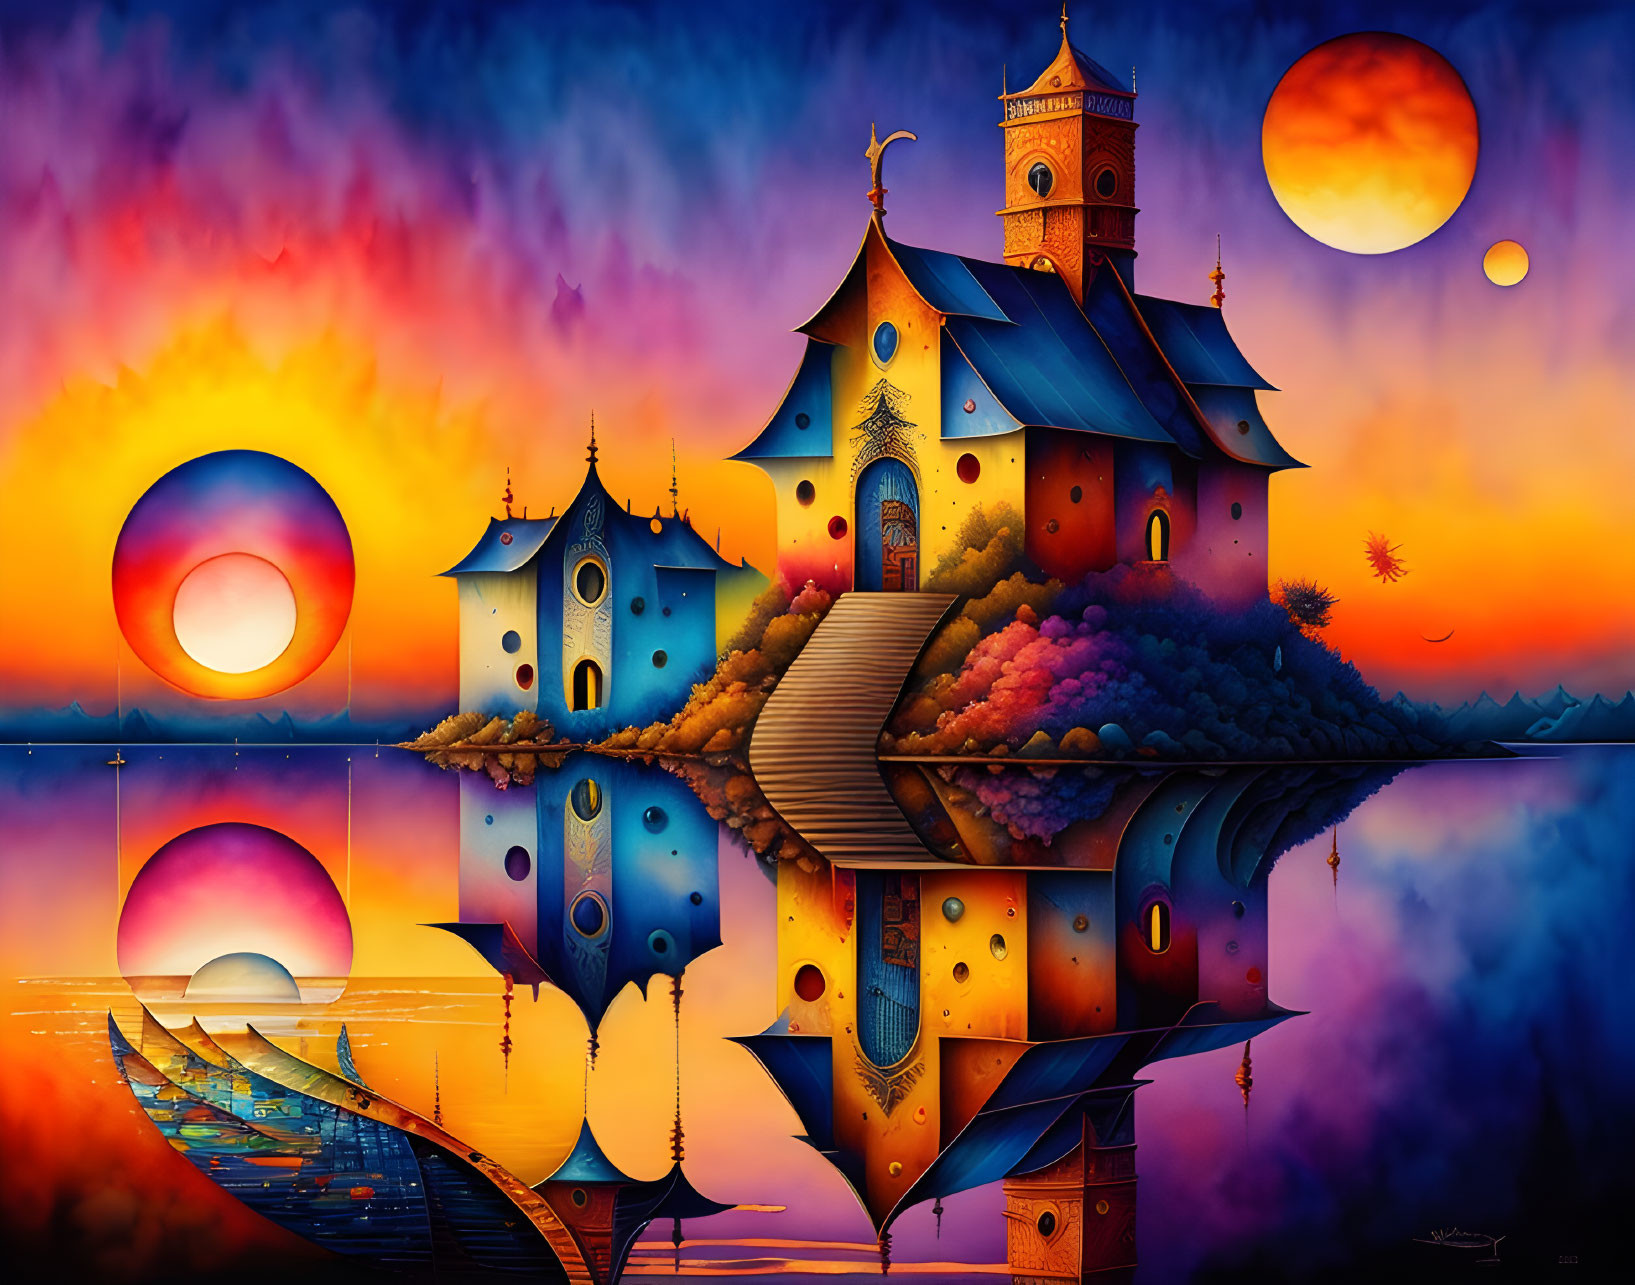 Surreal landscape with whimsical castle, arched bridges, and vibrant sunset sky